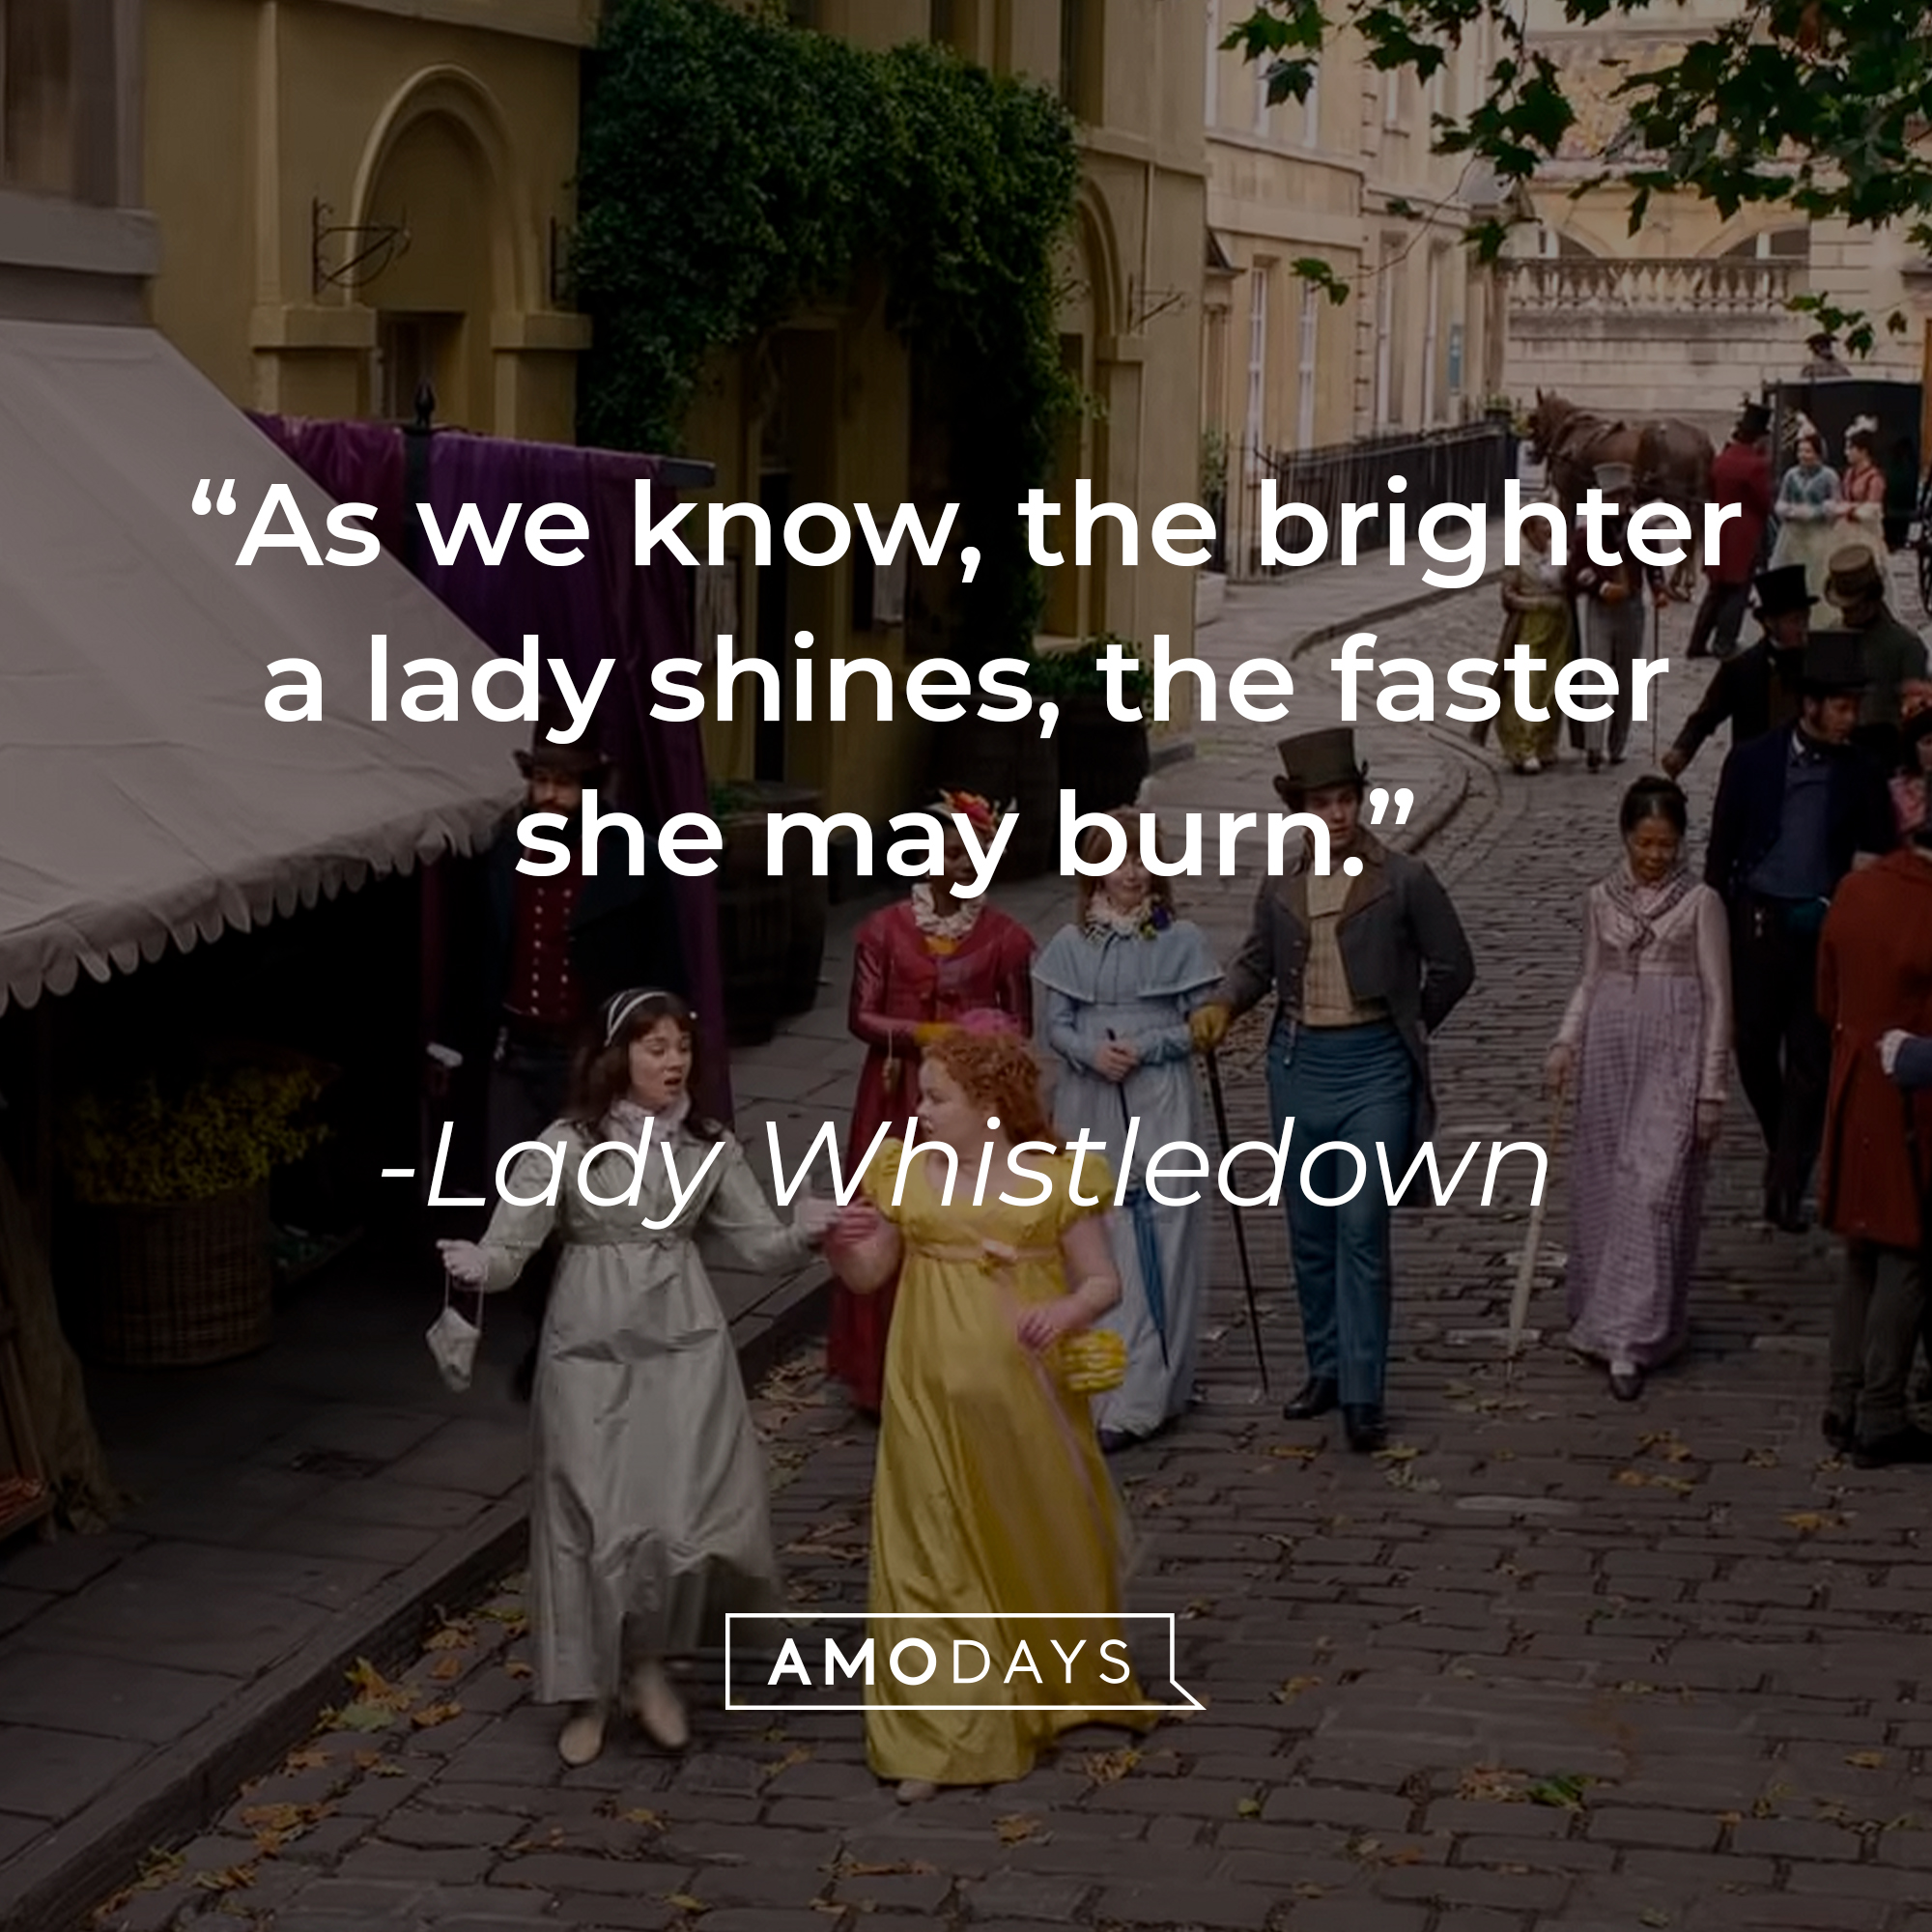 Lady Whistledown's quote: "As we know, the brighter a lady shines, the faster she may burn." | Source: Youtube.com/Netflix